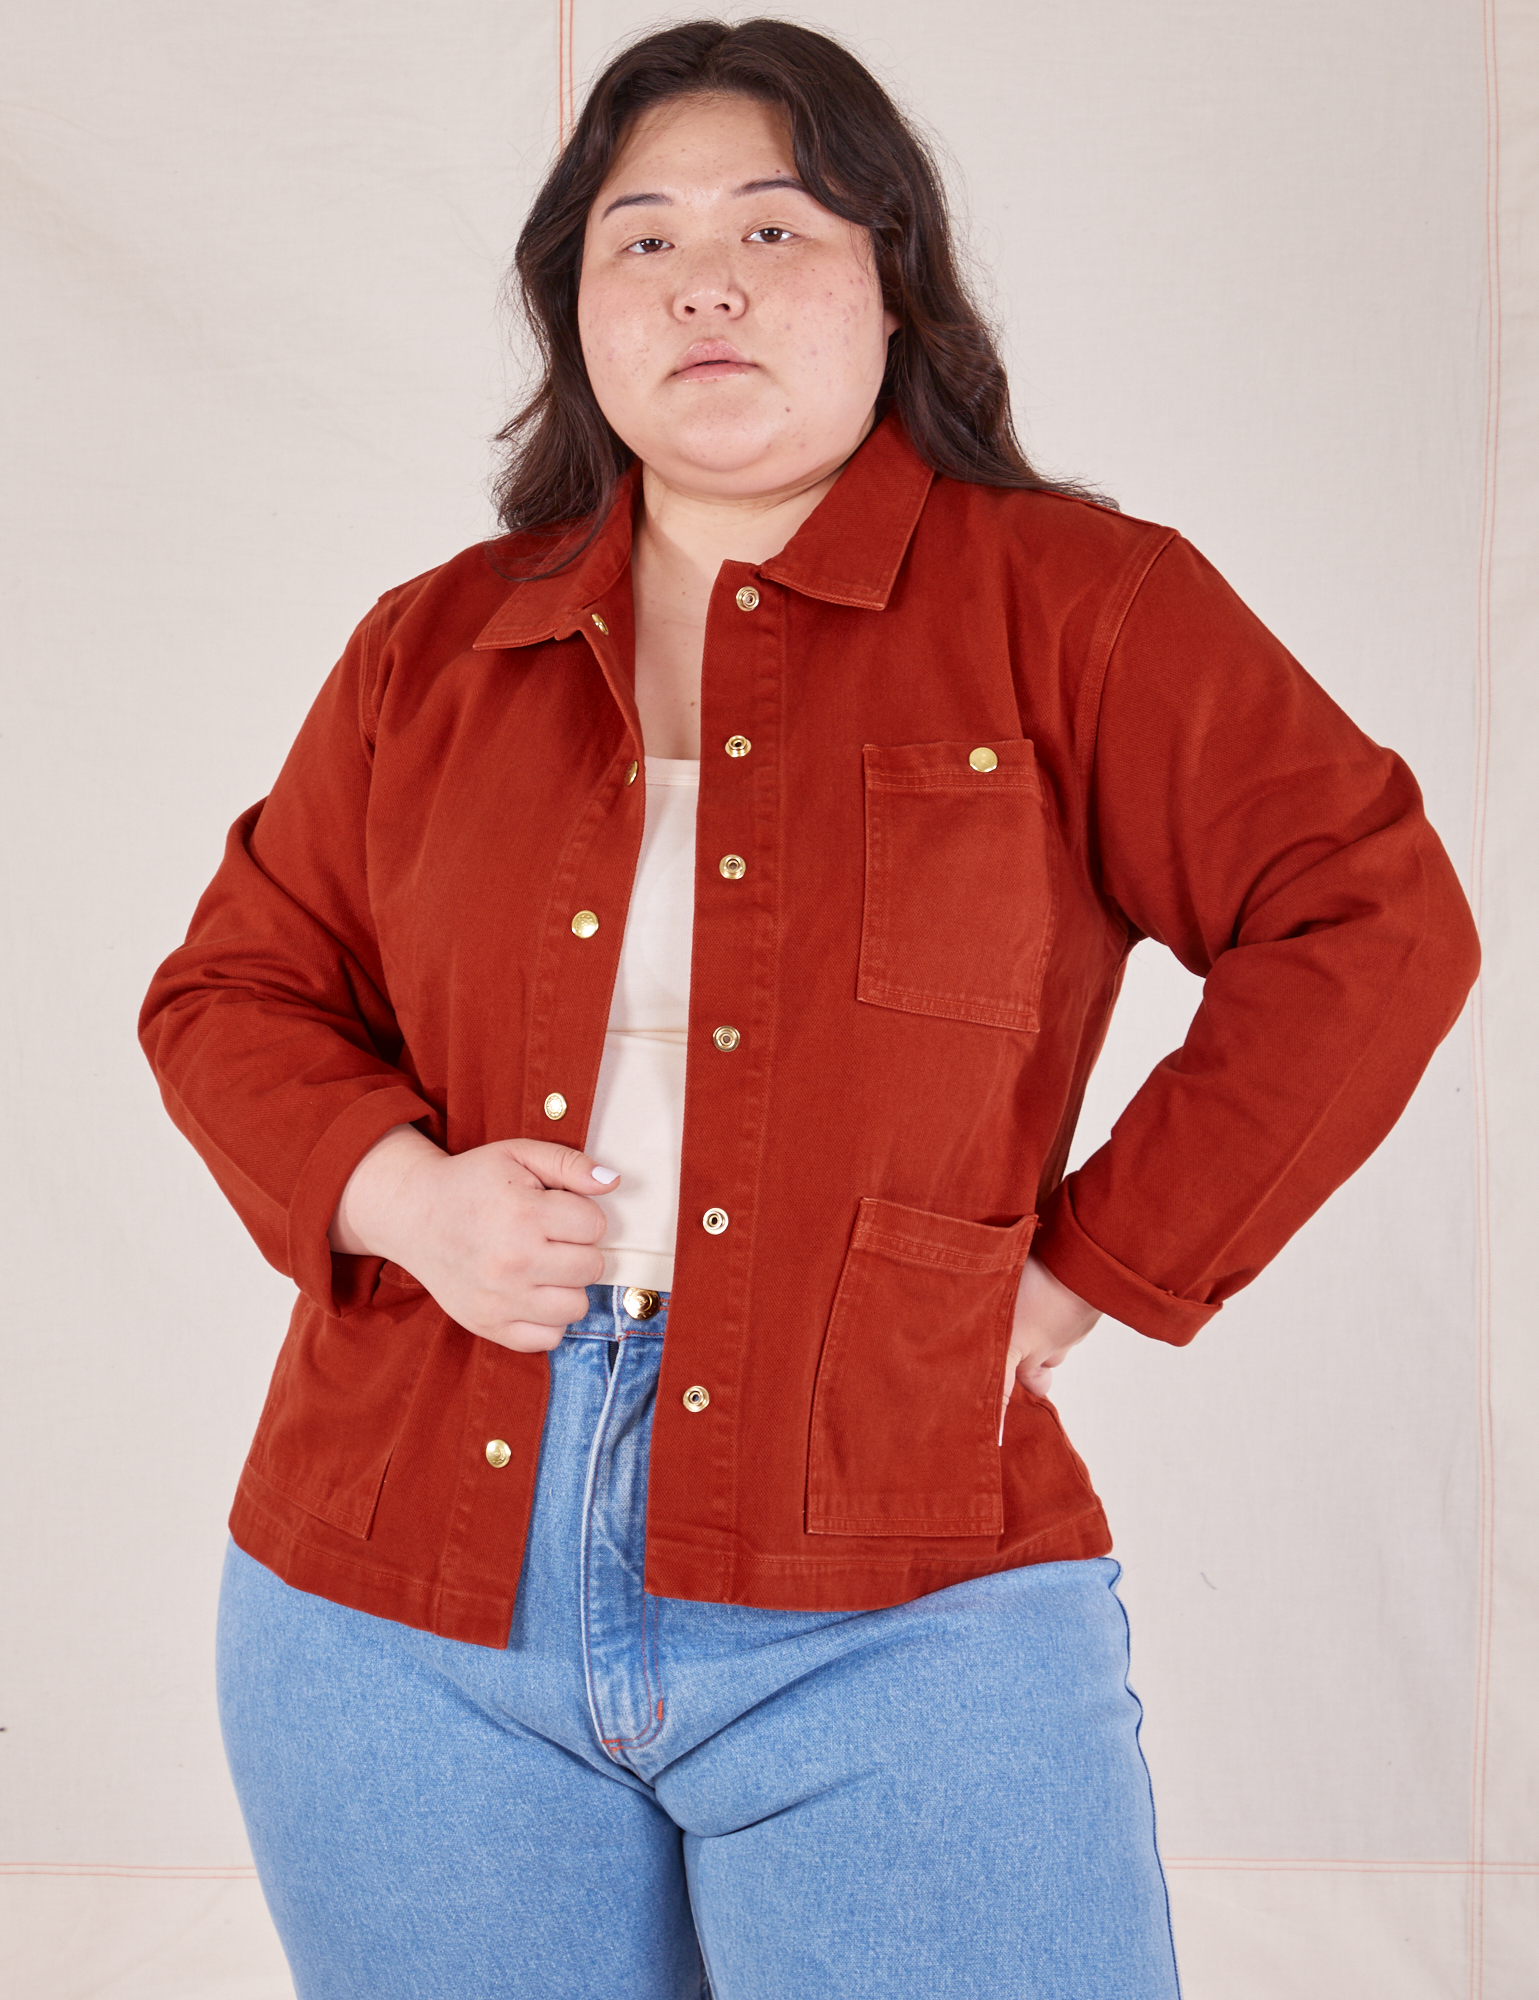 Ashley is 5&#39;7&quot; and wearing L Denim Work Jacket in Paprika